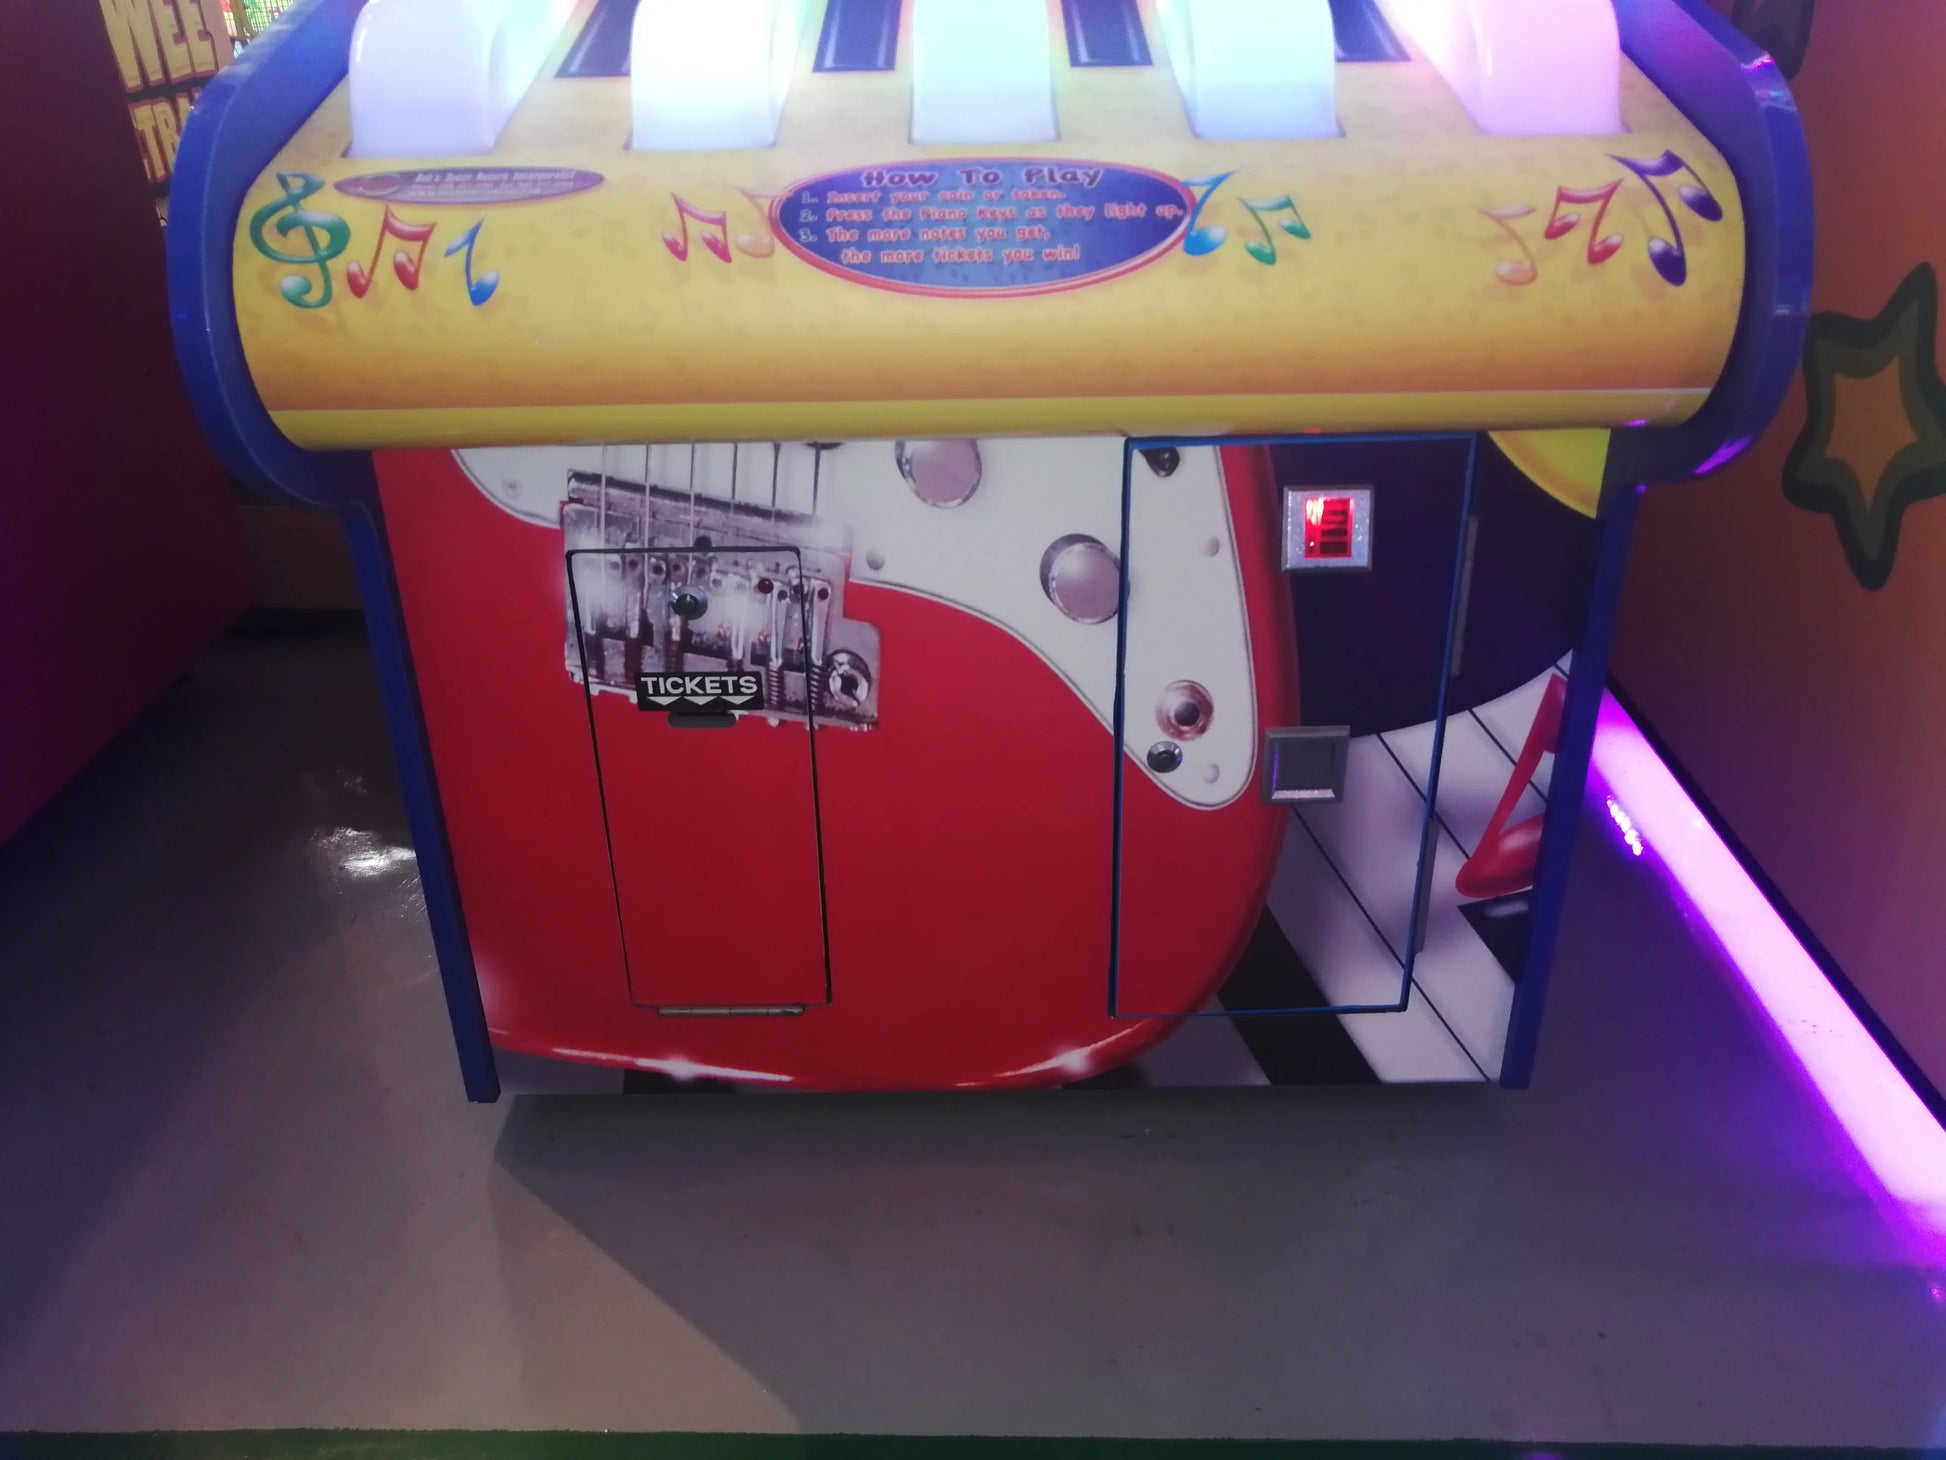  Melody-Spring-Lottery-Redemption-game-machine-Amusement-Coin-Operated-Ticket-Redemption-Electronic-games-Tomy-Arcade